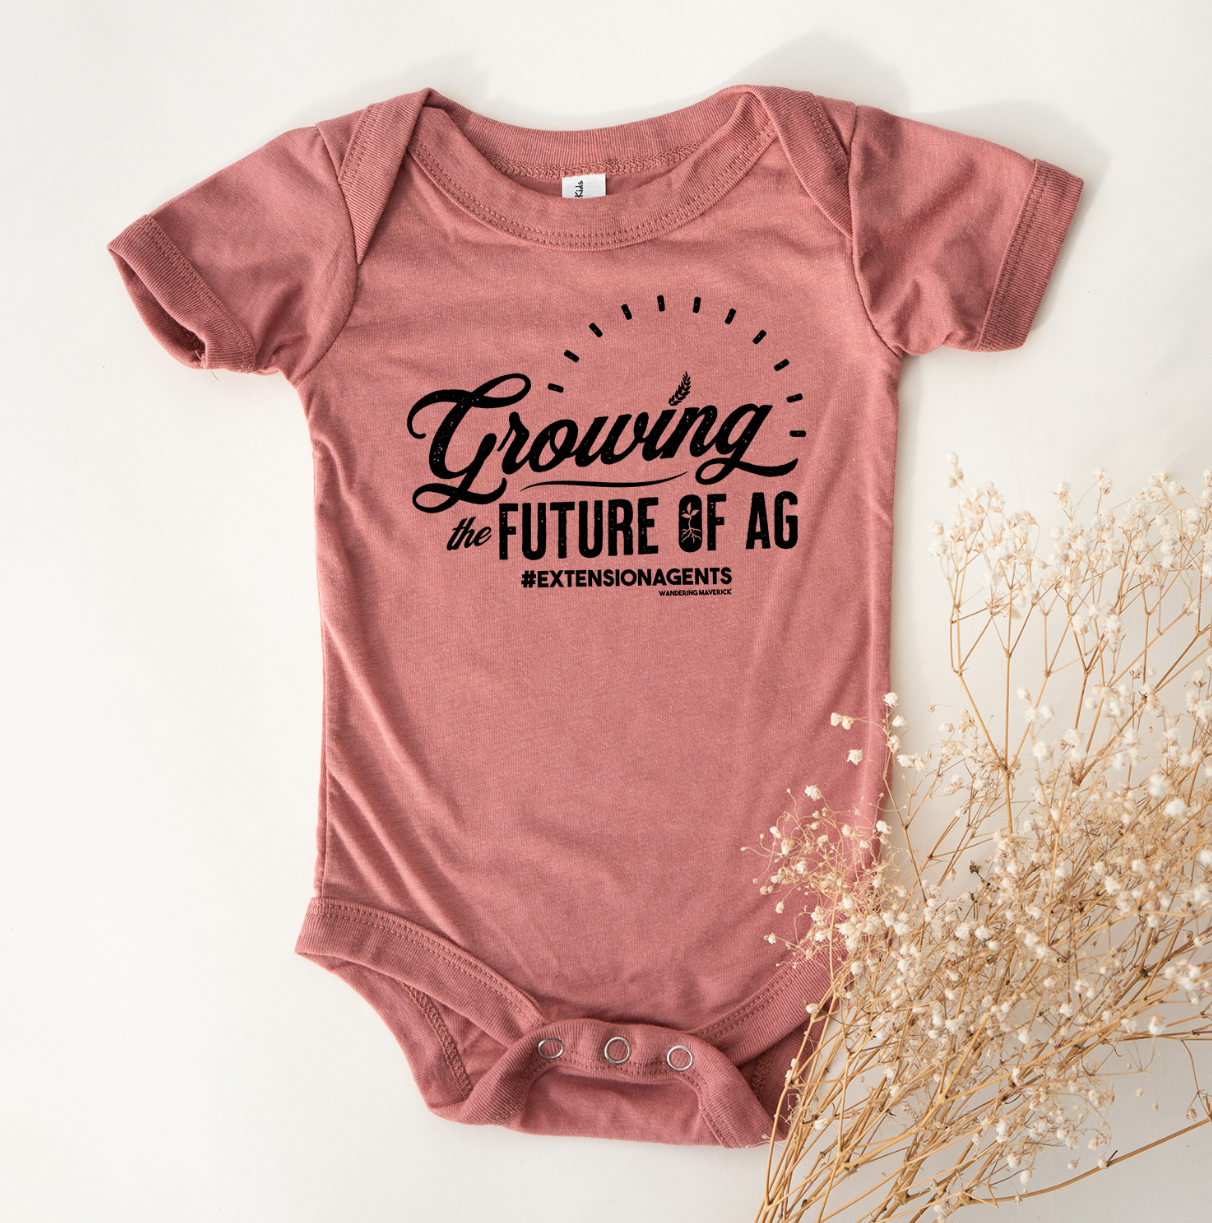 Growing The Future Of Ag #Extension Agents One Piece/T-Shirt (Newborn - Youth XL) - Multiple Colors!